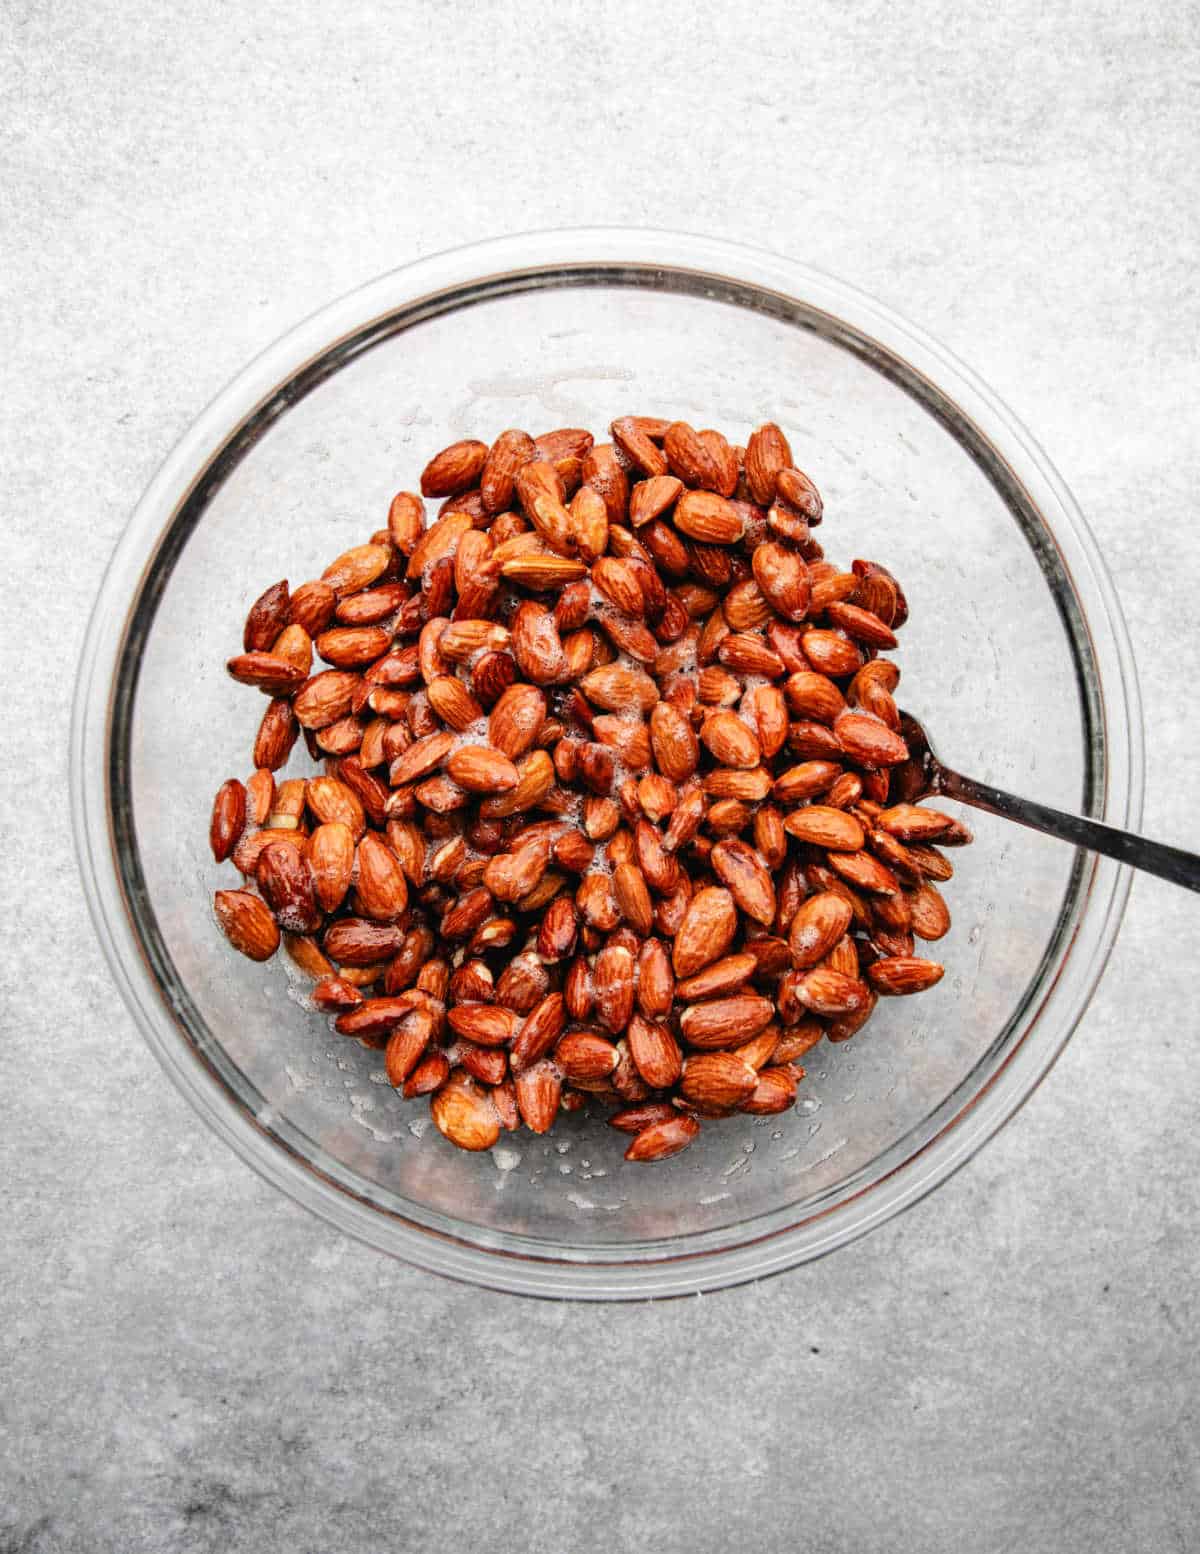 Almonds coated in egg mixture in a glass mixing bowl. 